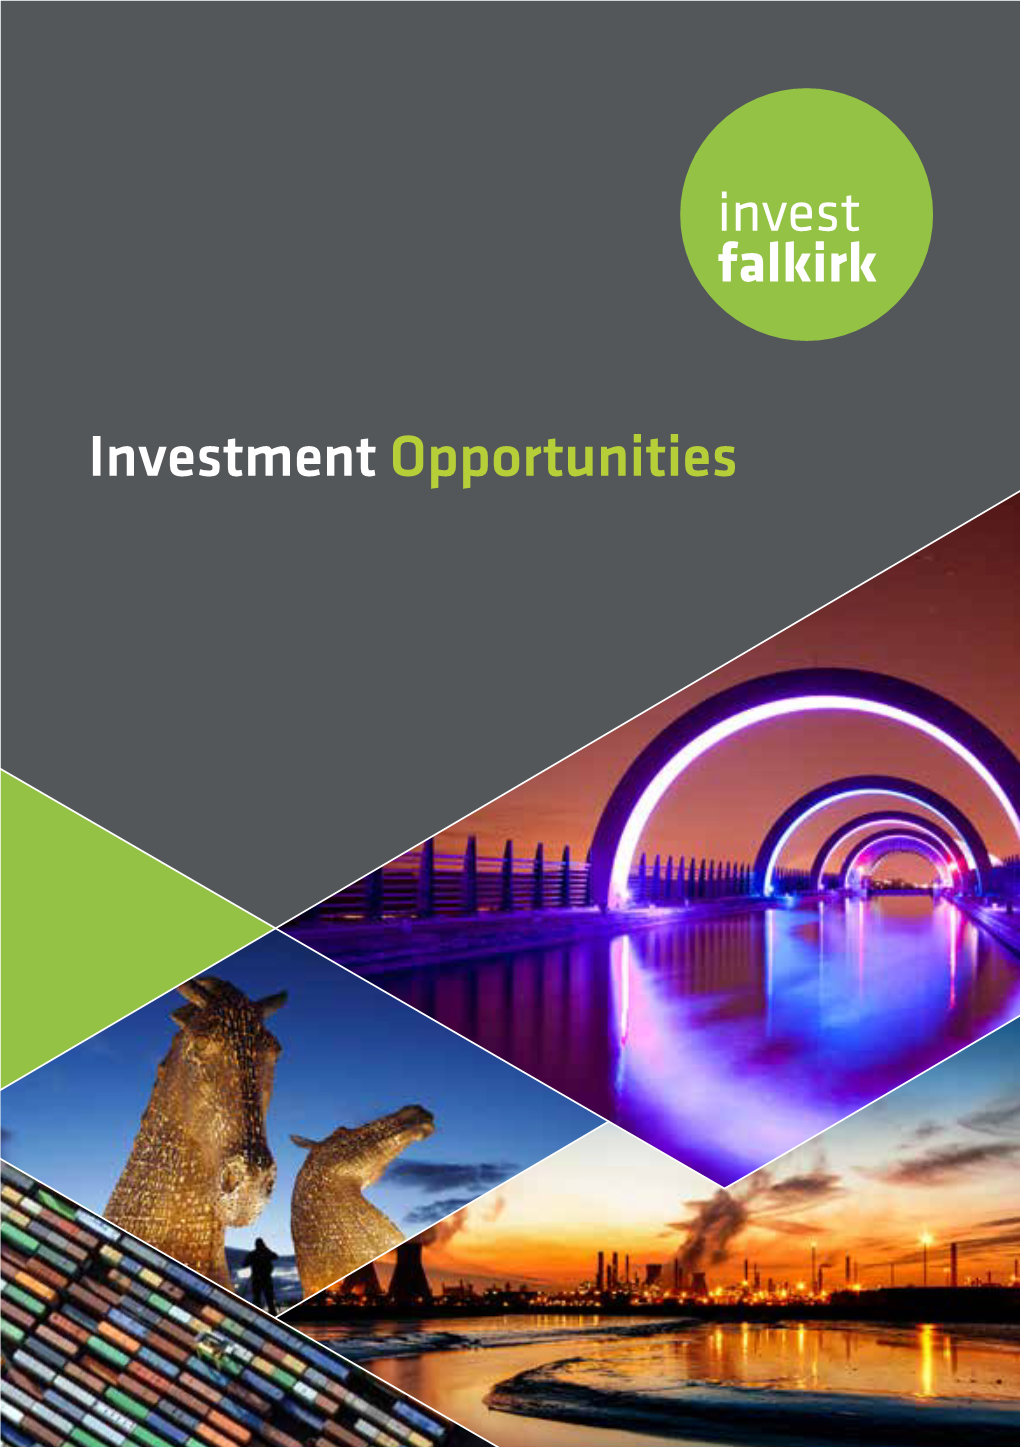 Investment Opportunities Investing in Falkirk Development Sites